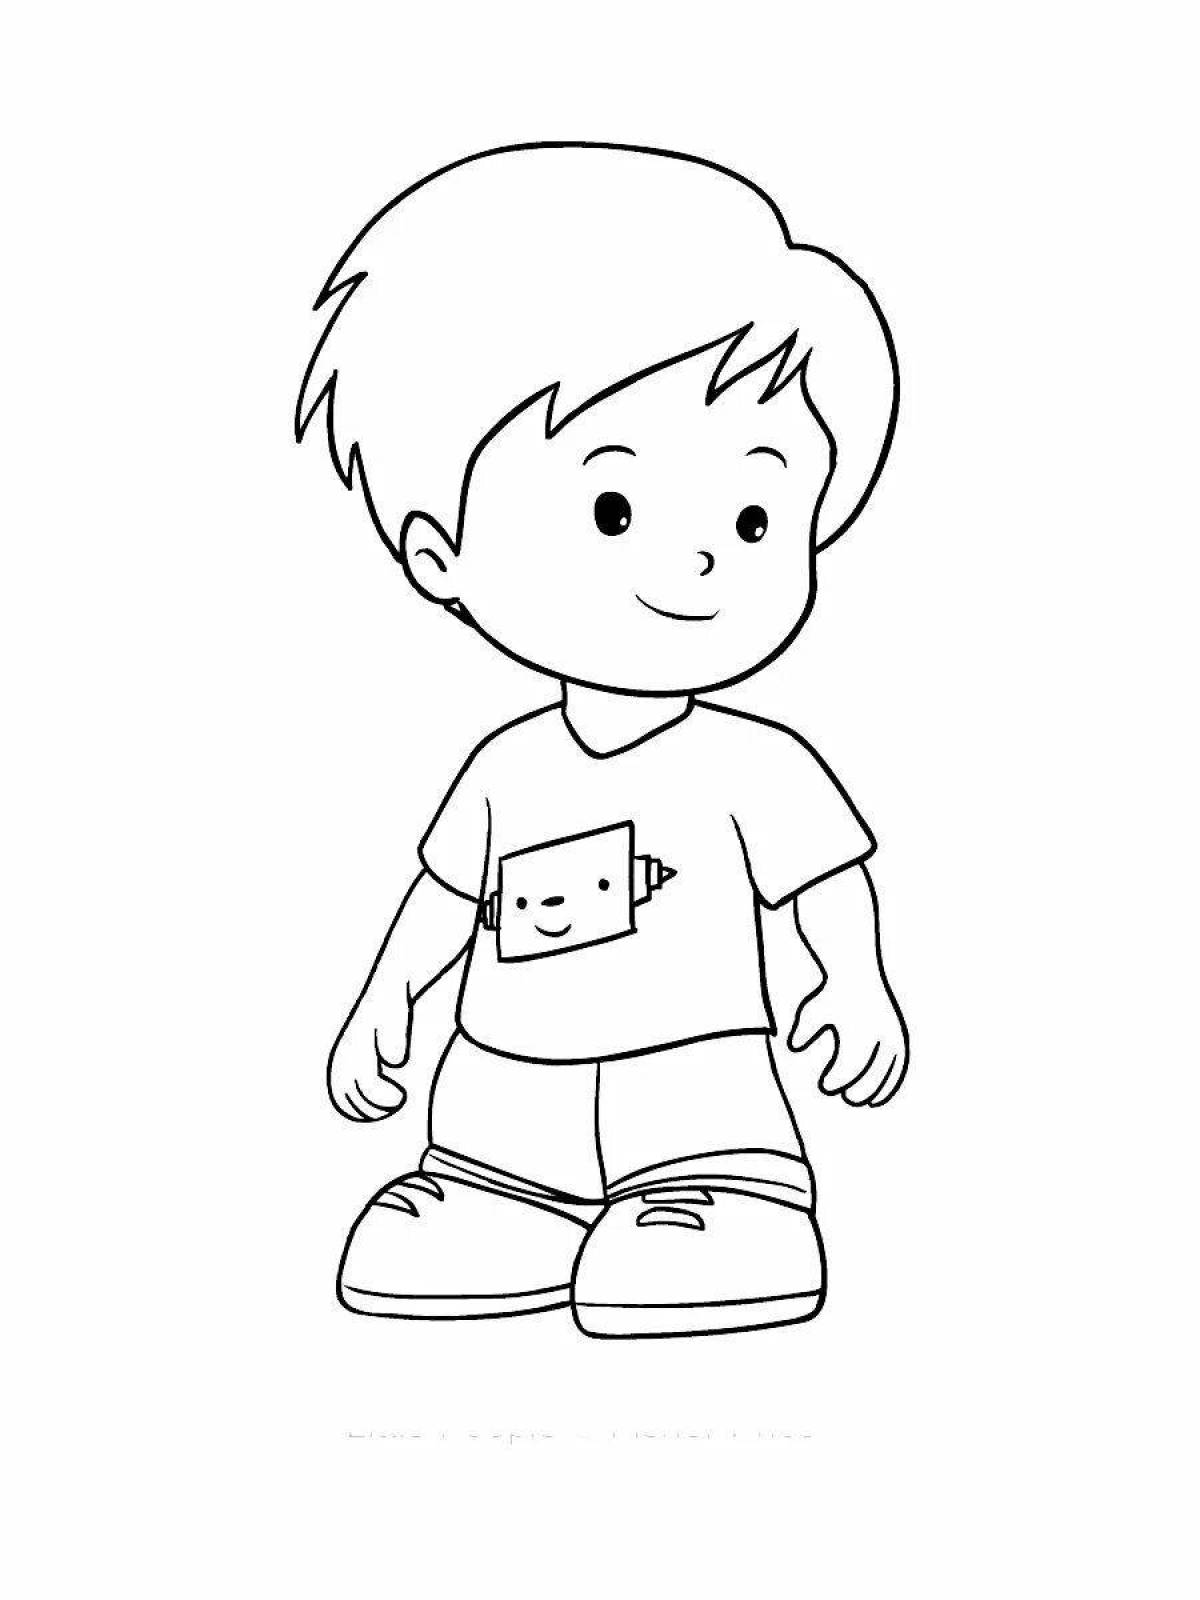 Coloring book happy little man